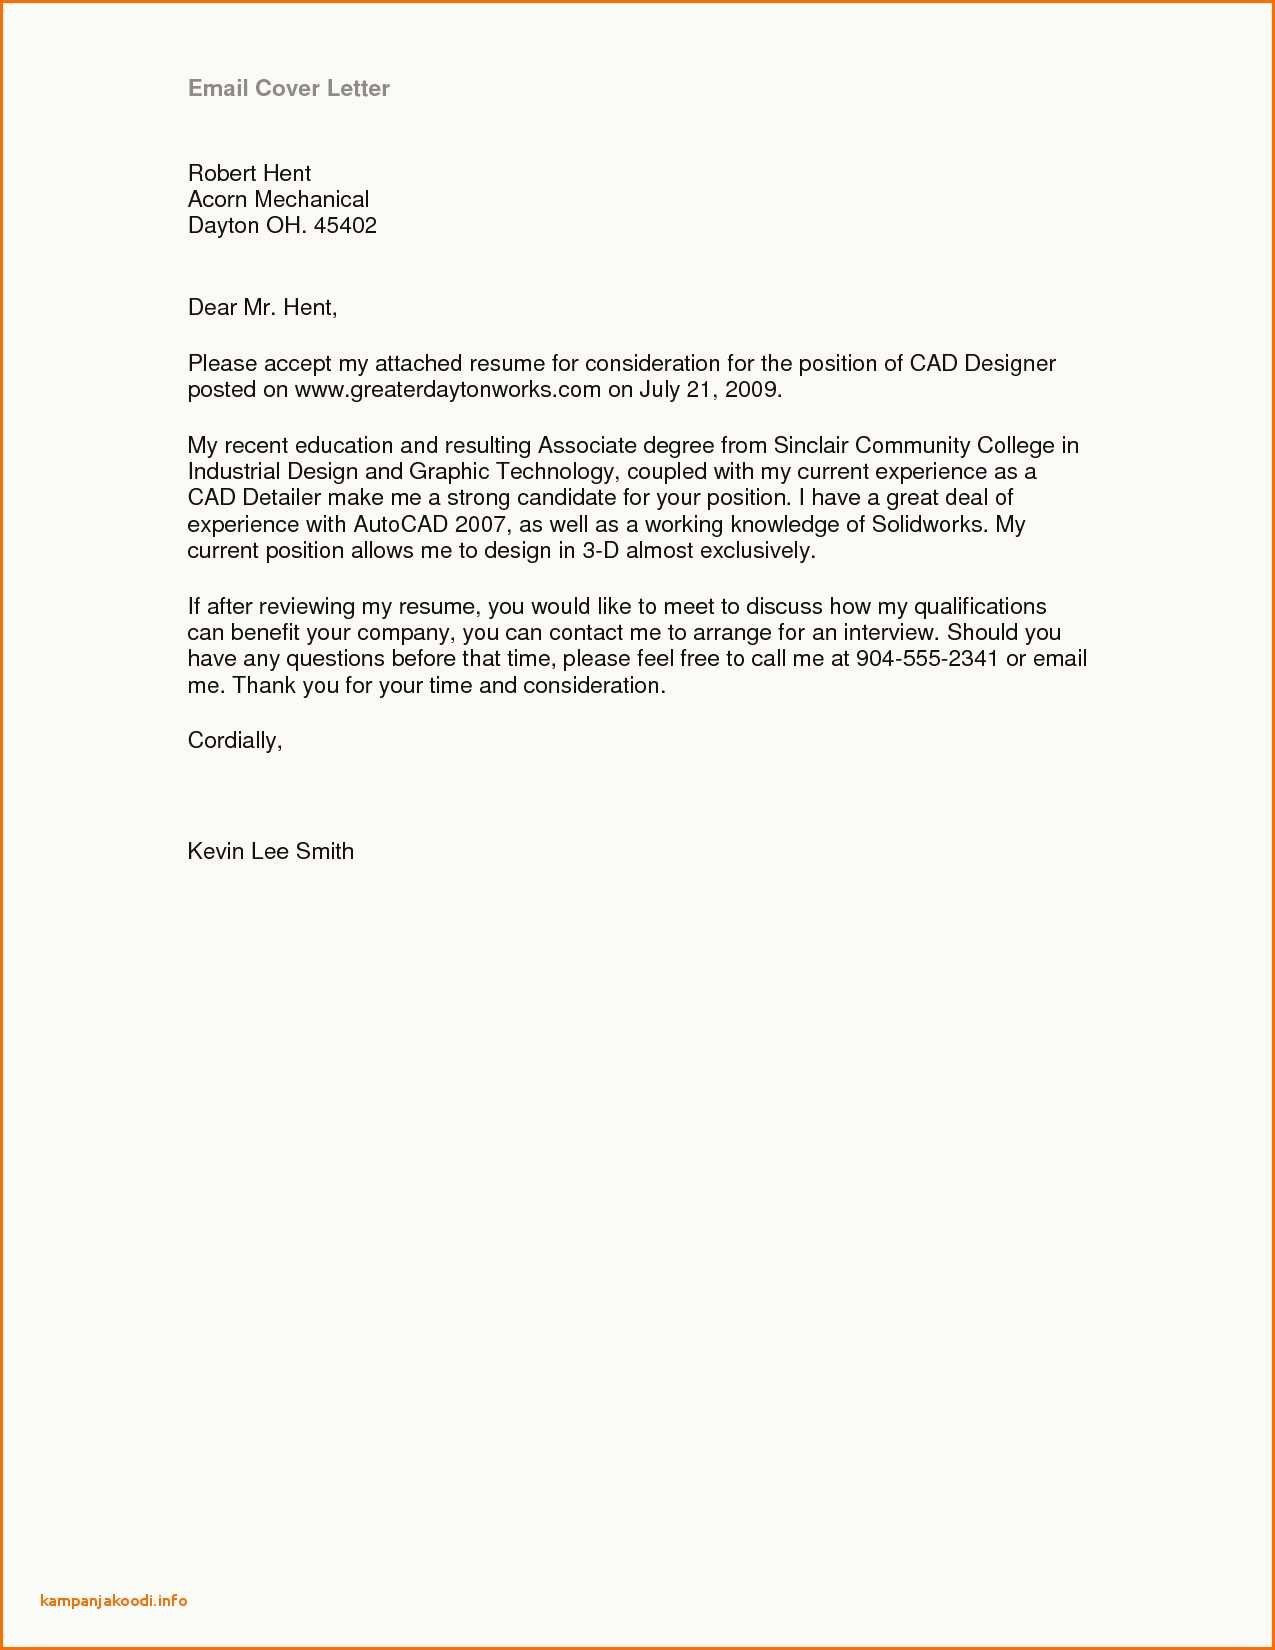 Sample Of Cover Letter for Email Resume Application Letter Sample In Email : Cover Letter Examples for …